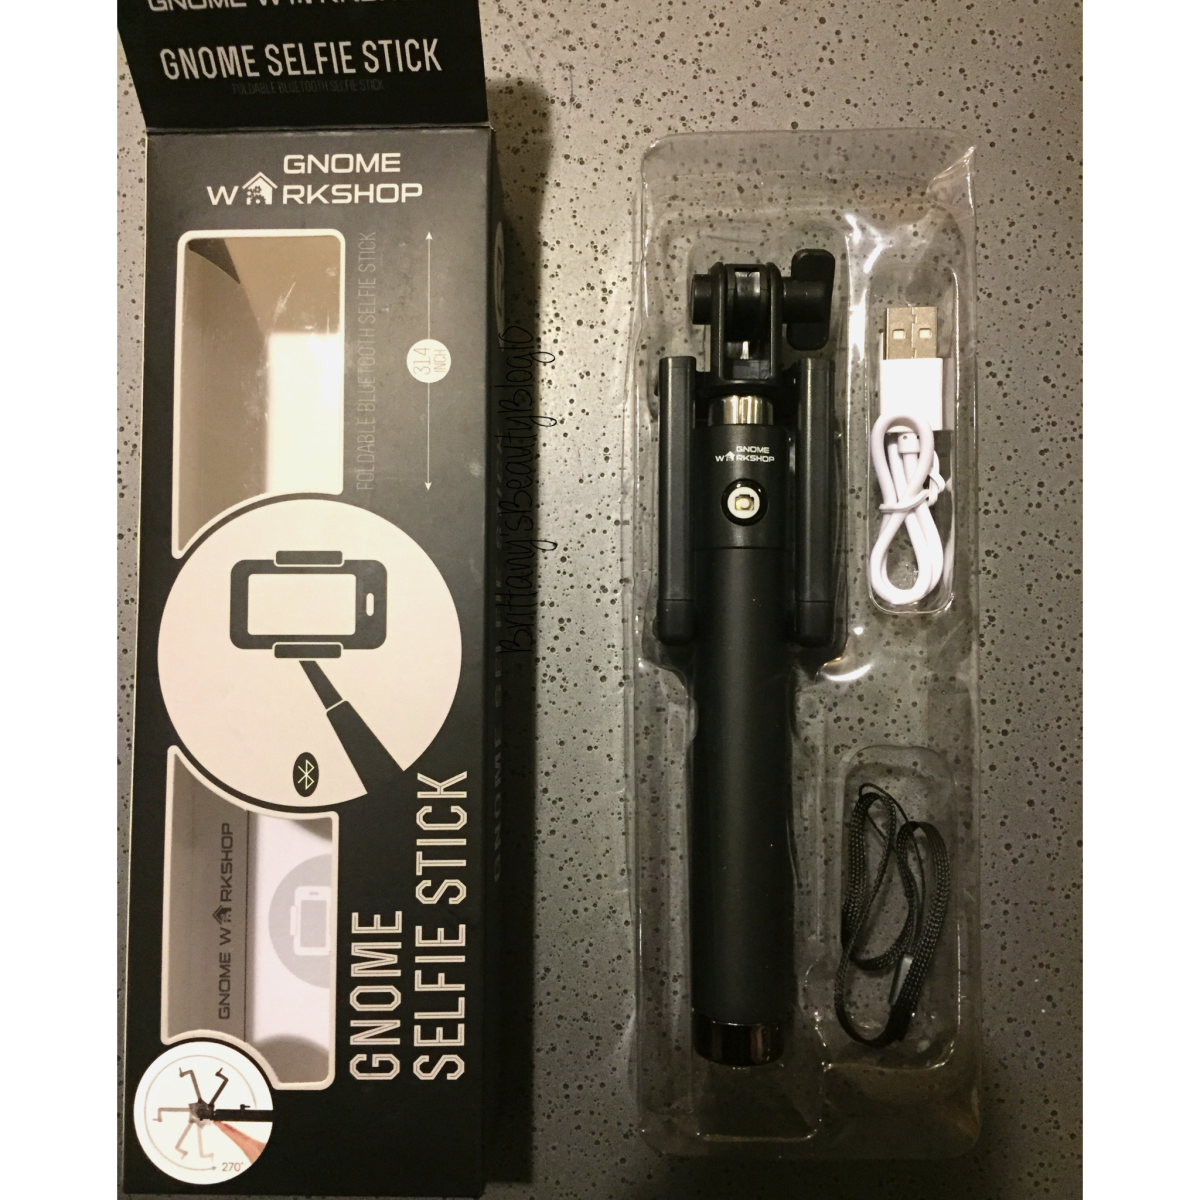 monopod selfie stick with cord instructions